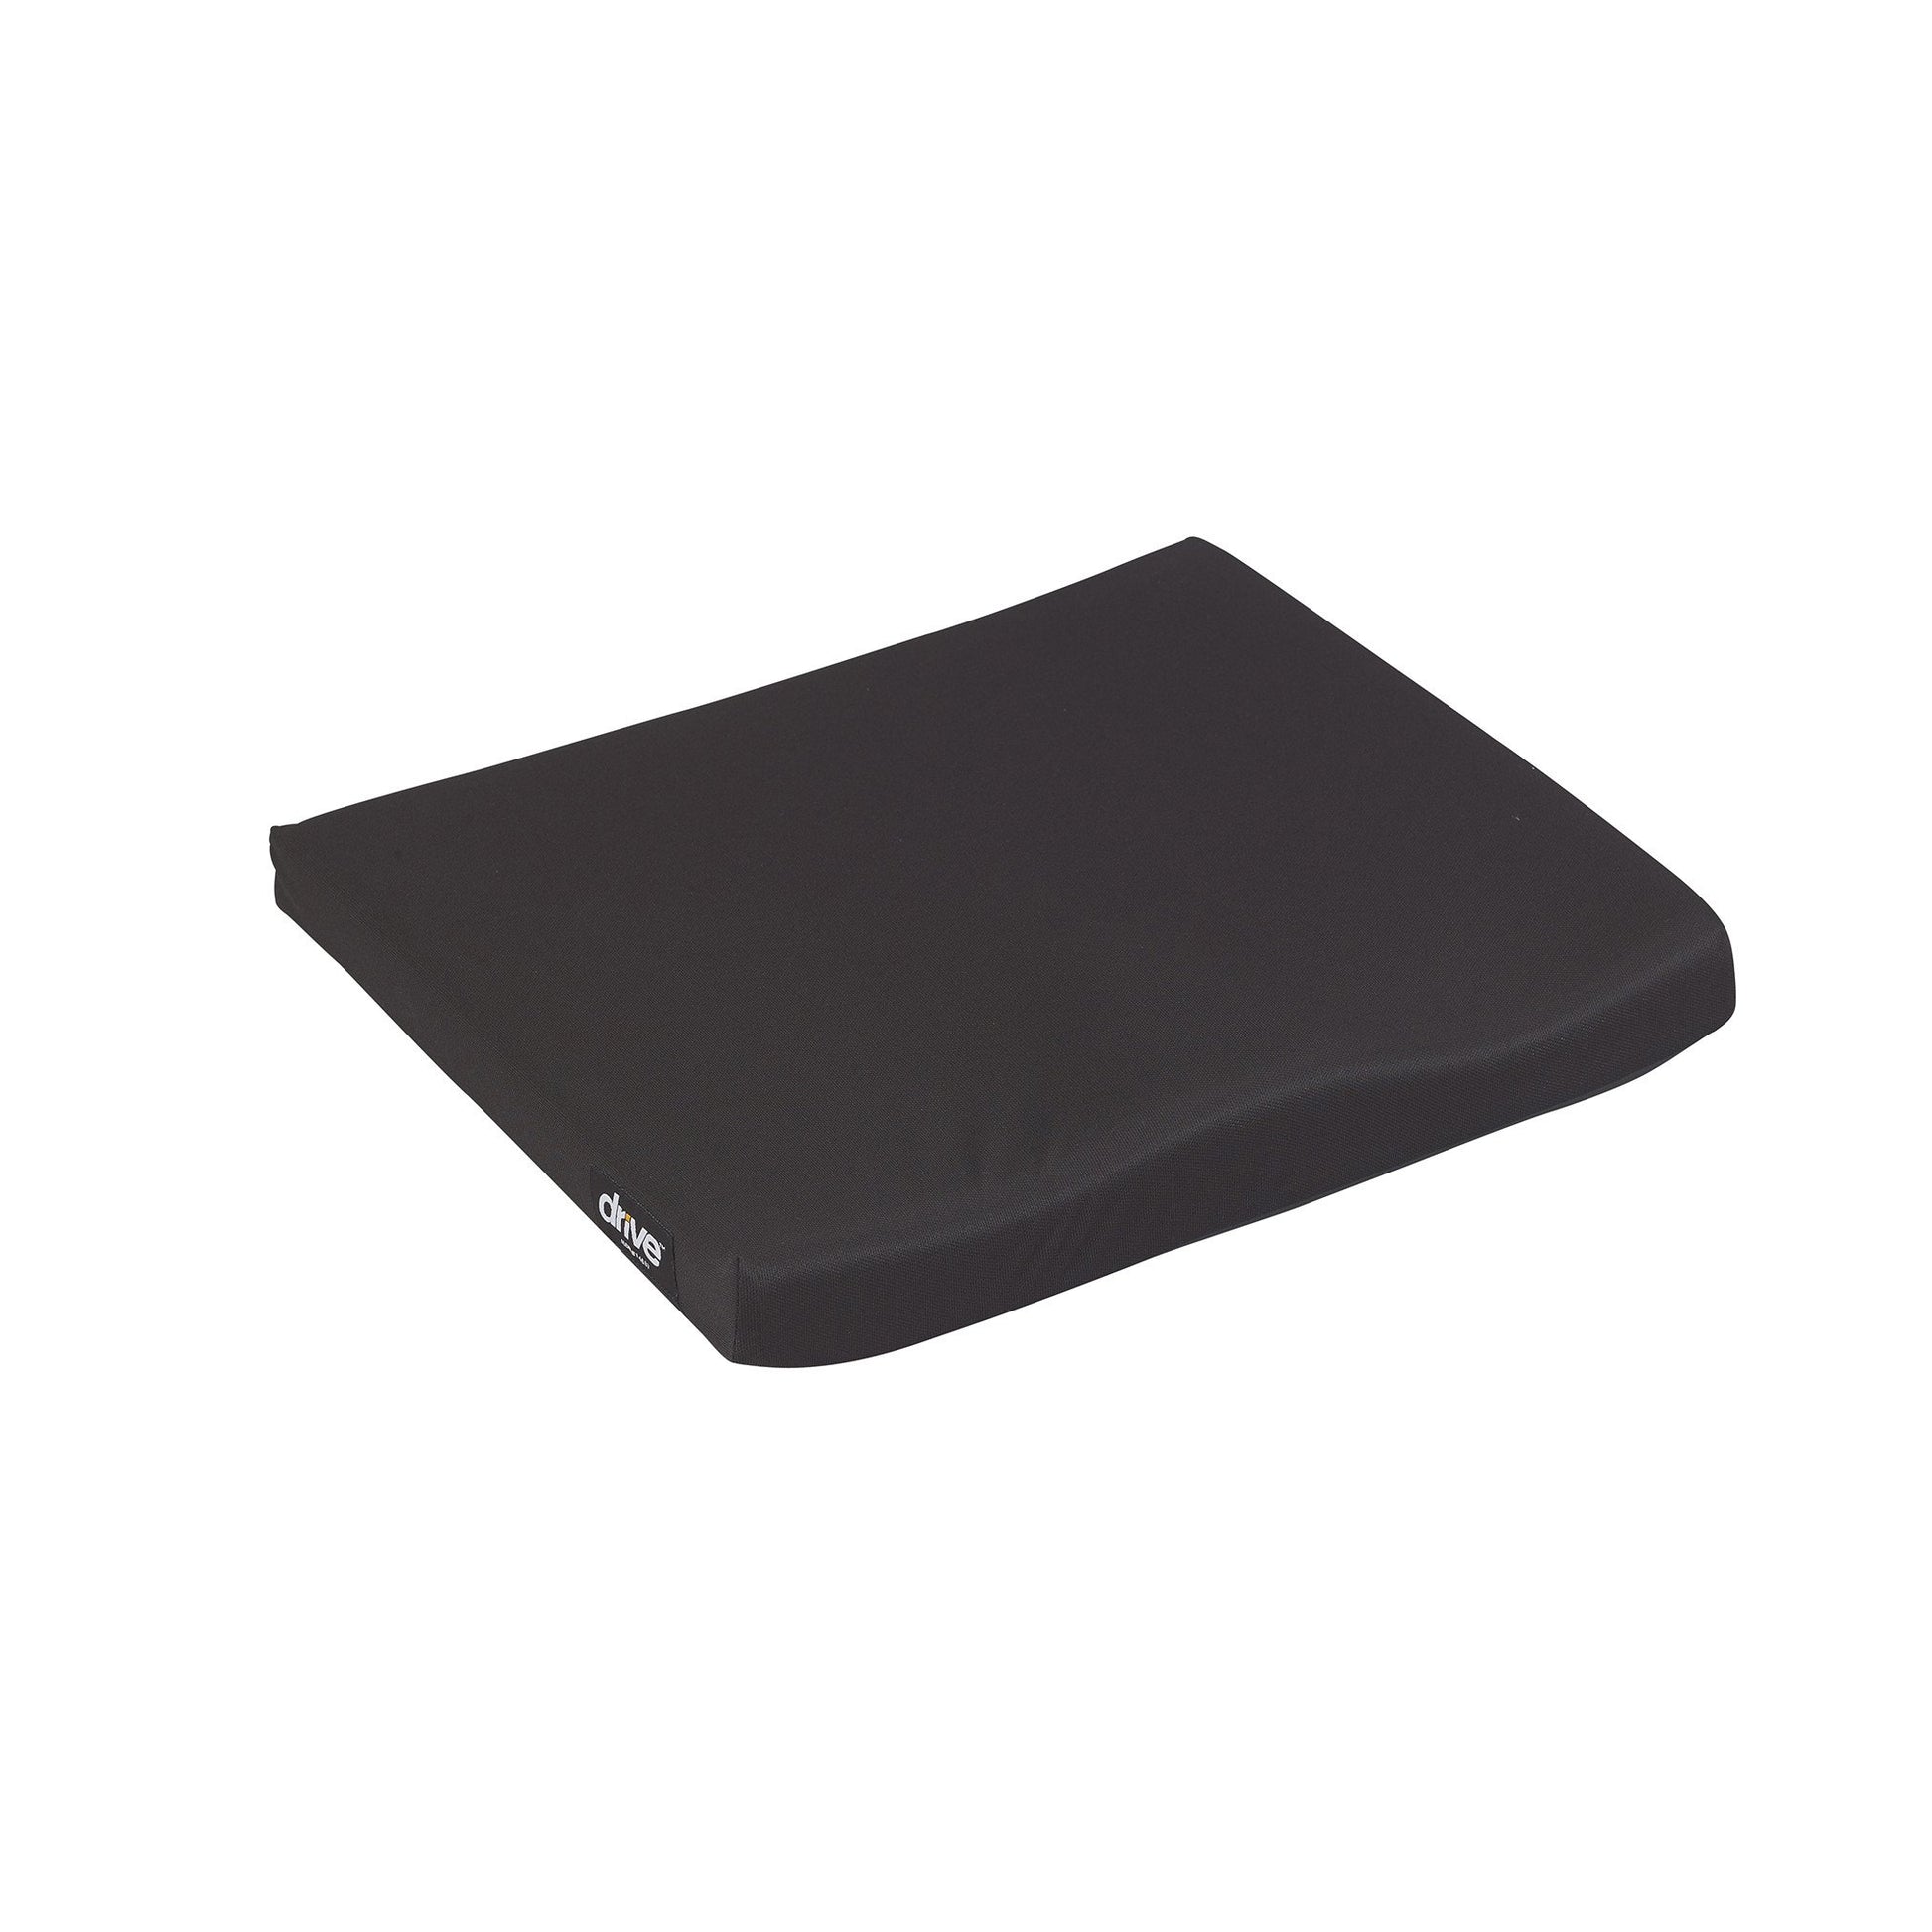 Molded General Use 1 3/4" Wheelchair Seat Cushion